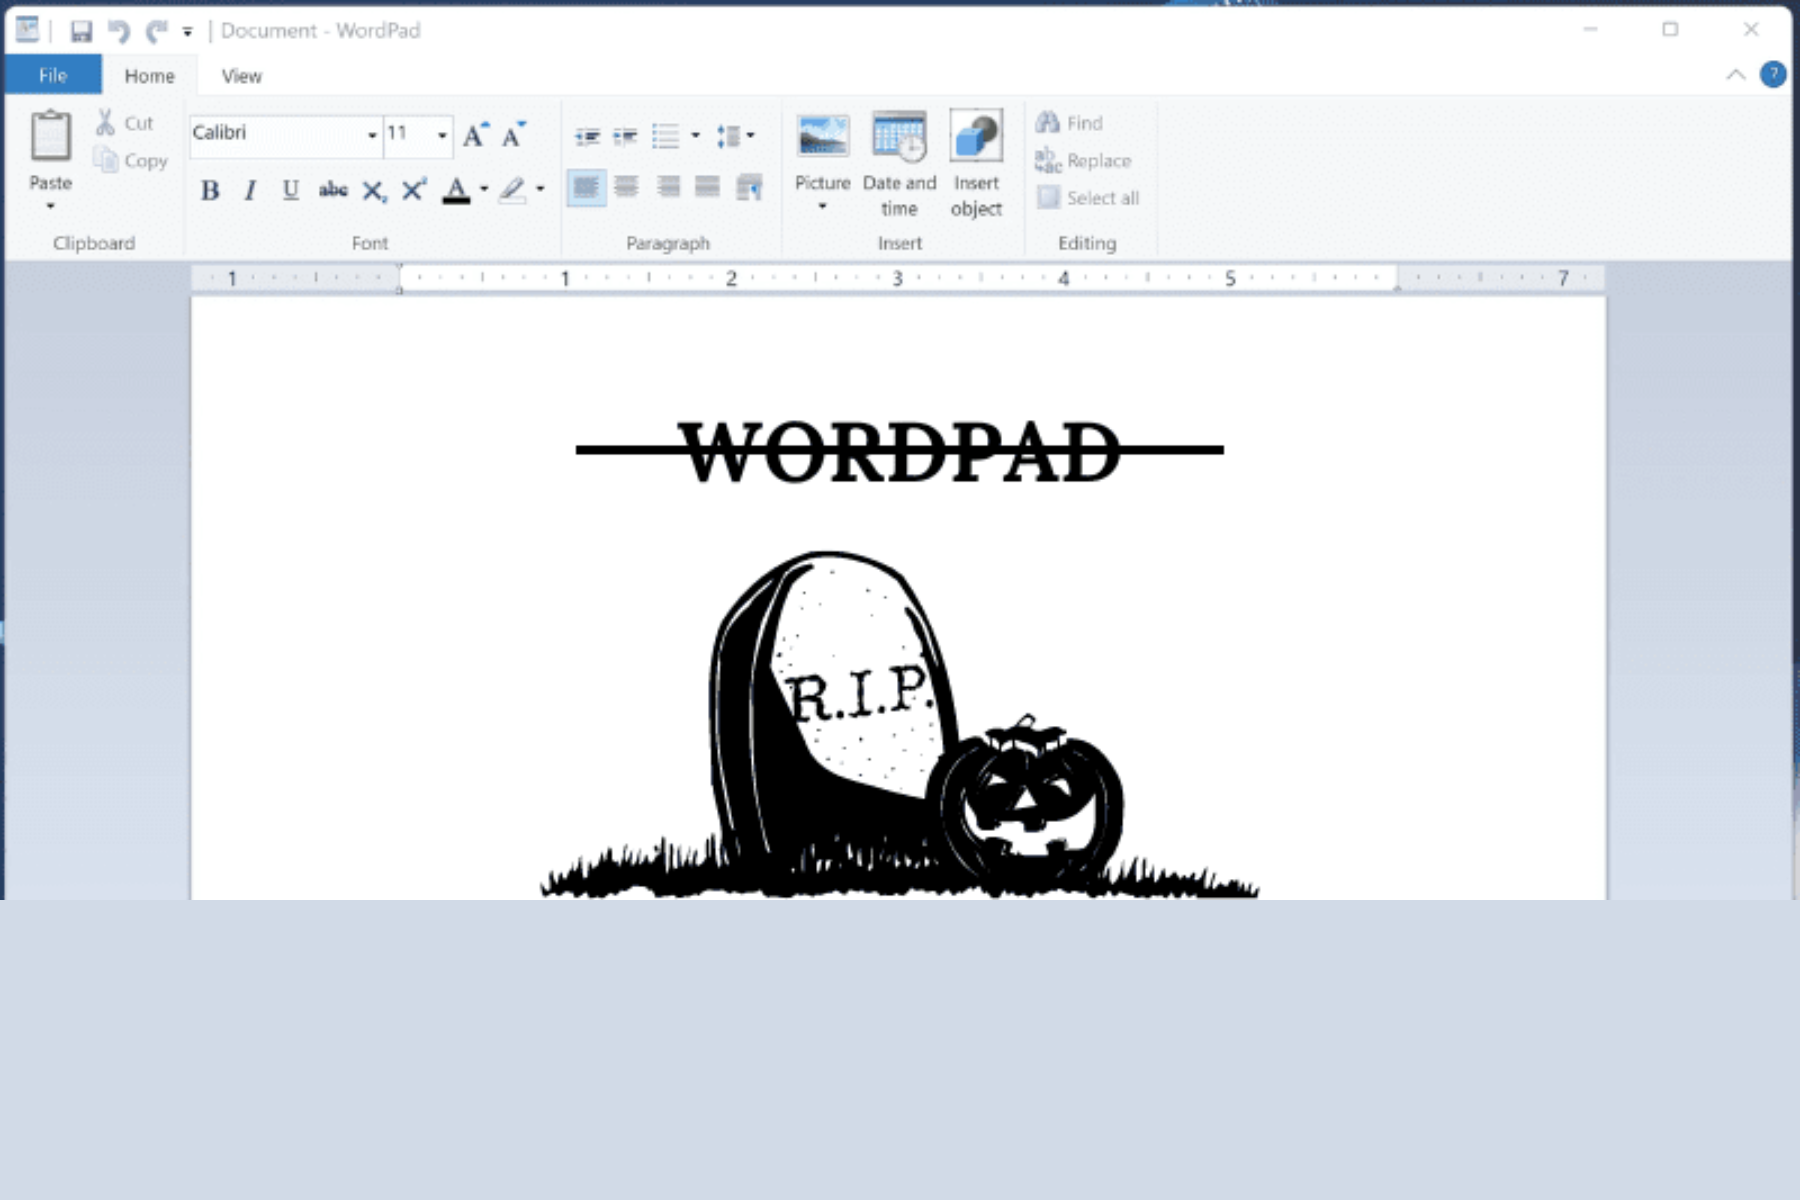 A WordPad page with the word 'WORDPAD' highlighted with a strikethrough and a RIP